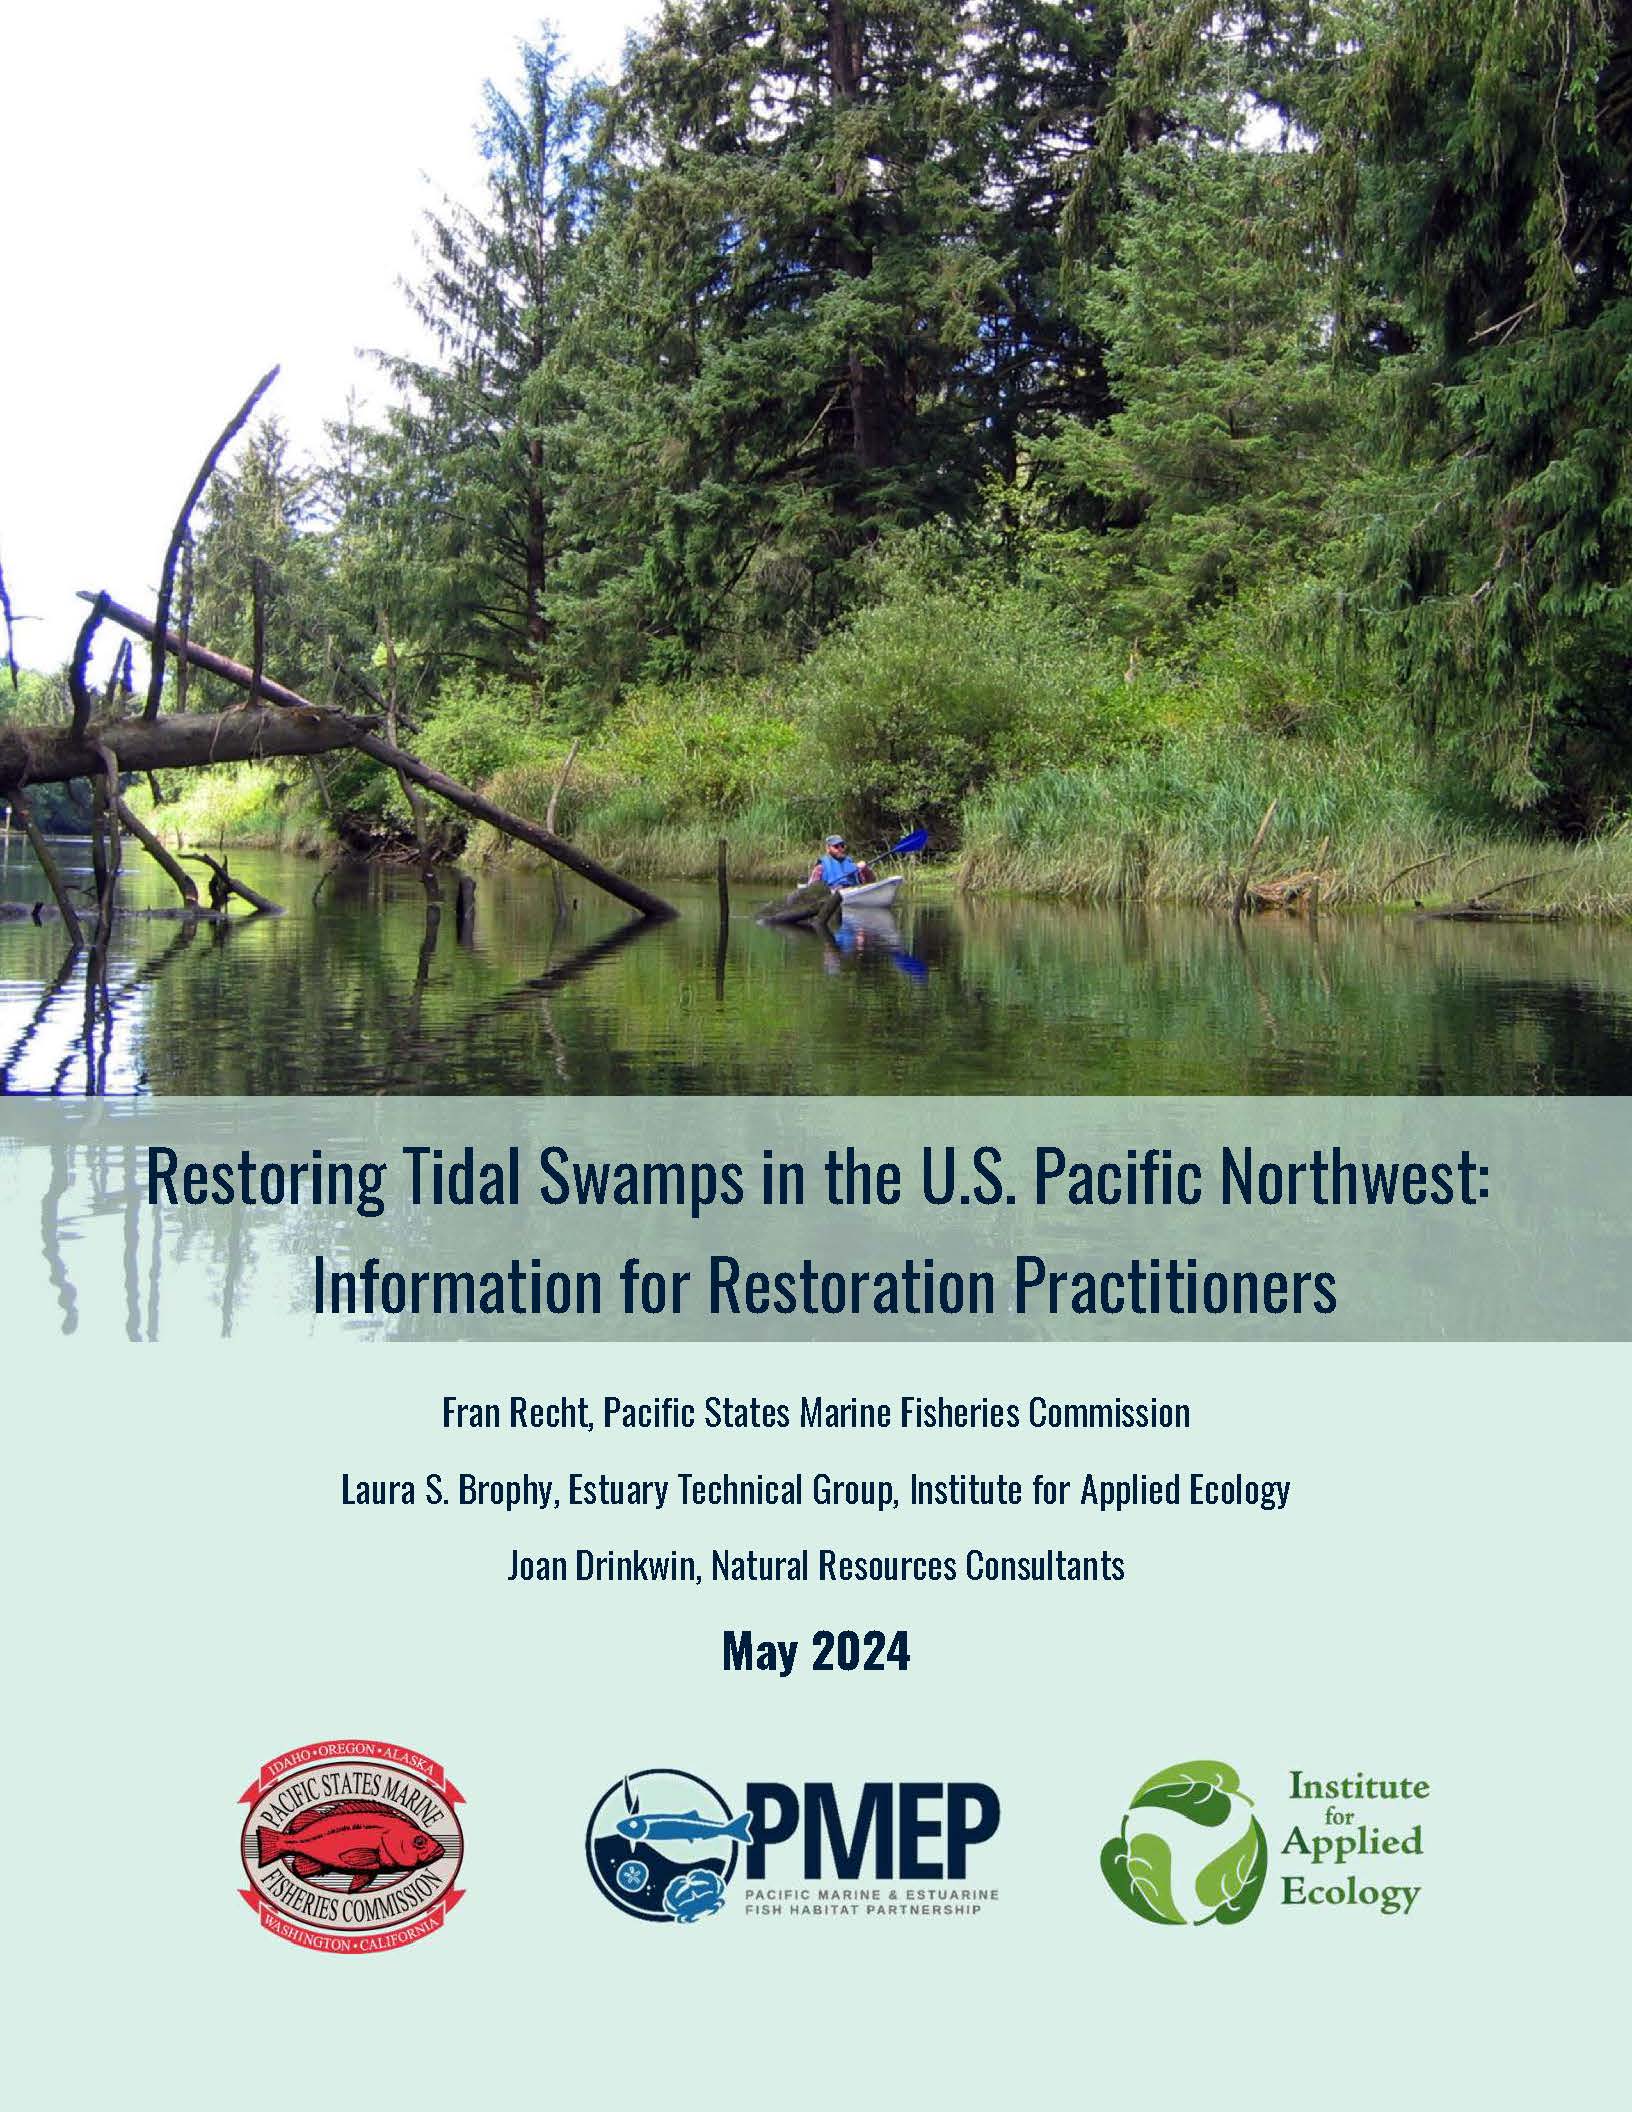 Restoring Tidal Swamps in the U.S. Pacific Northwest: Information for Restoration Practitioners (2024)